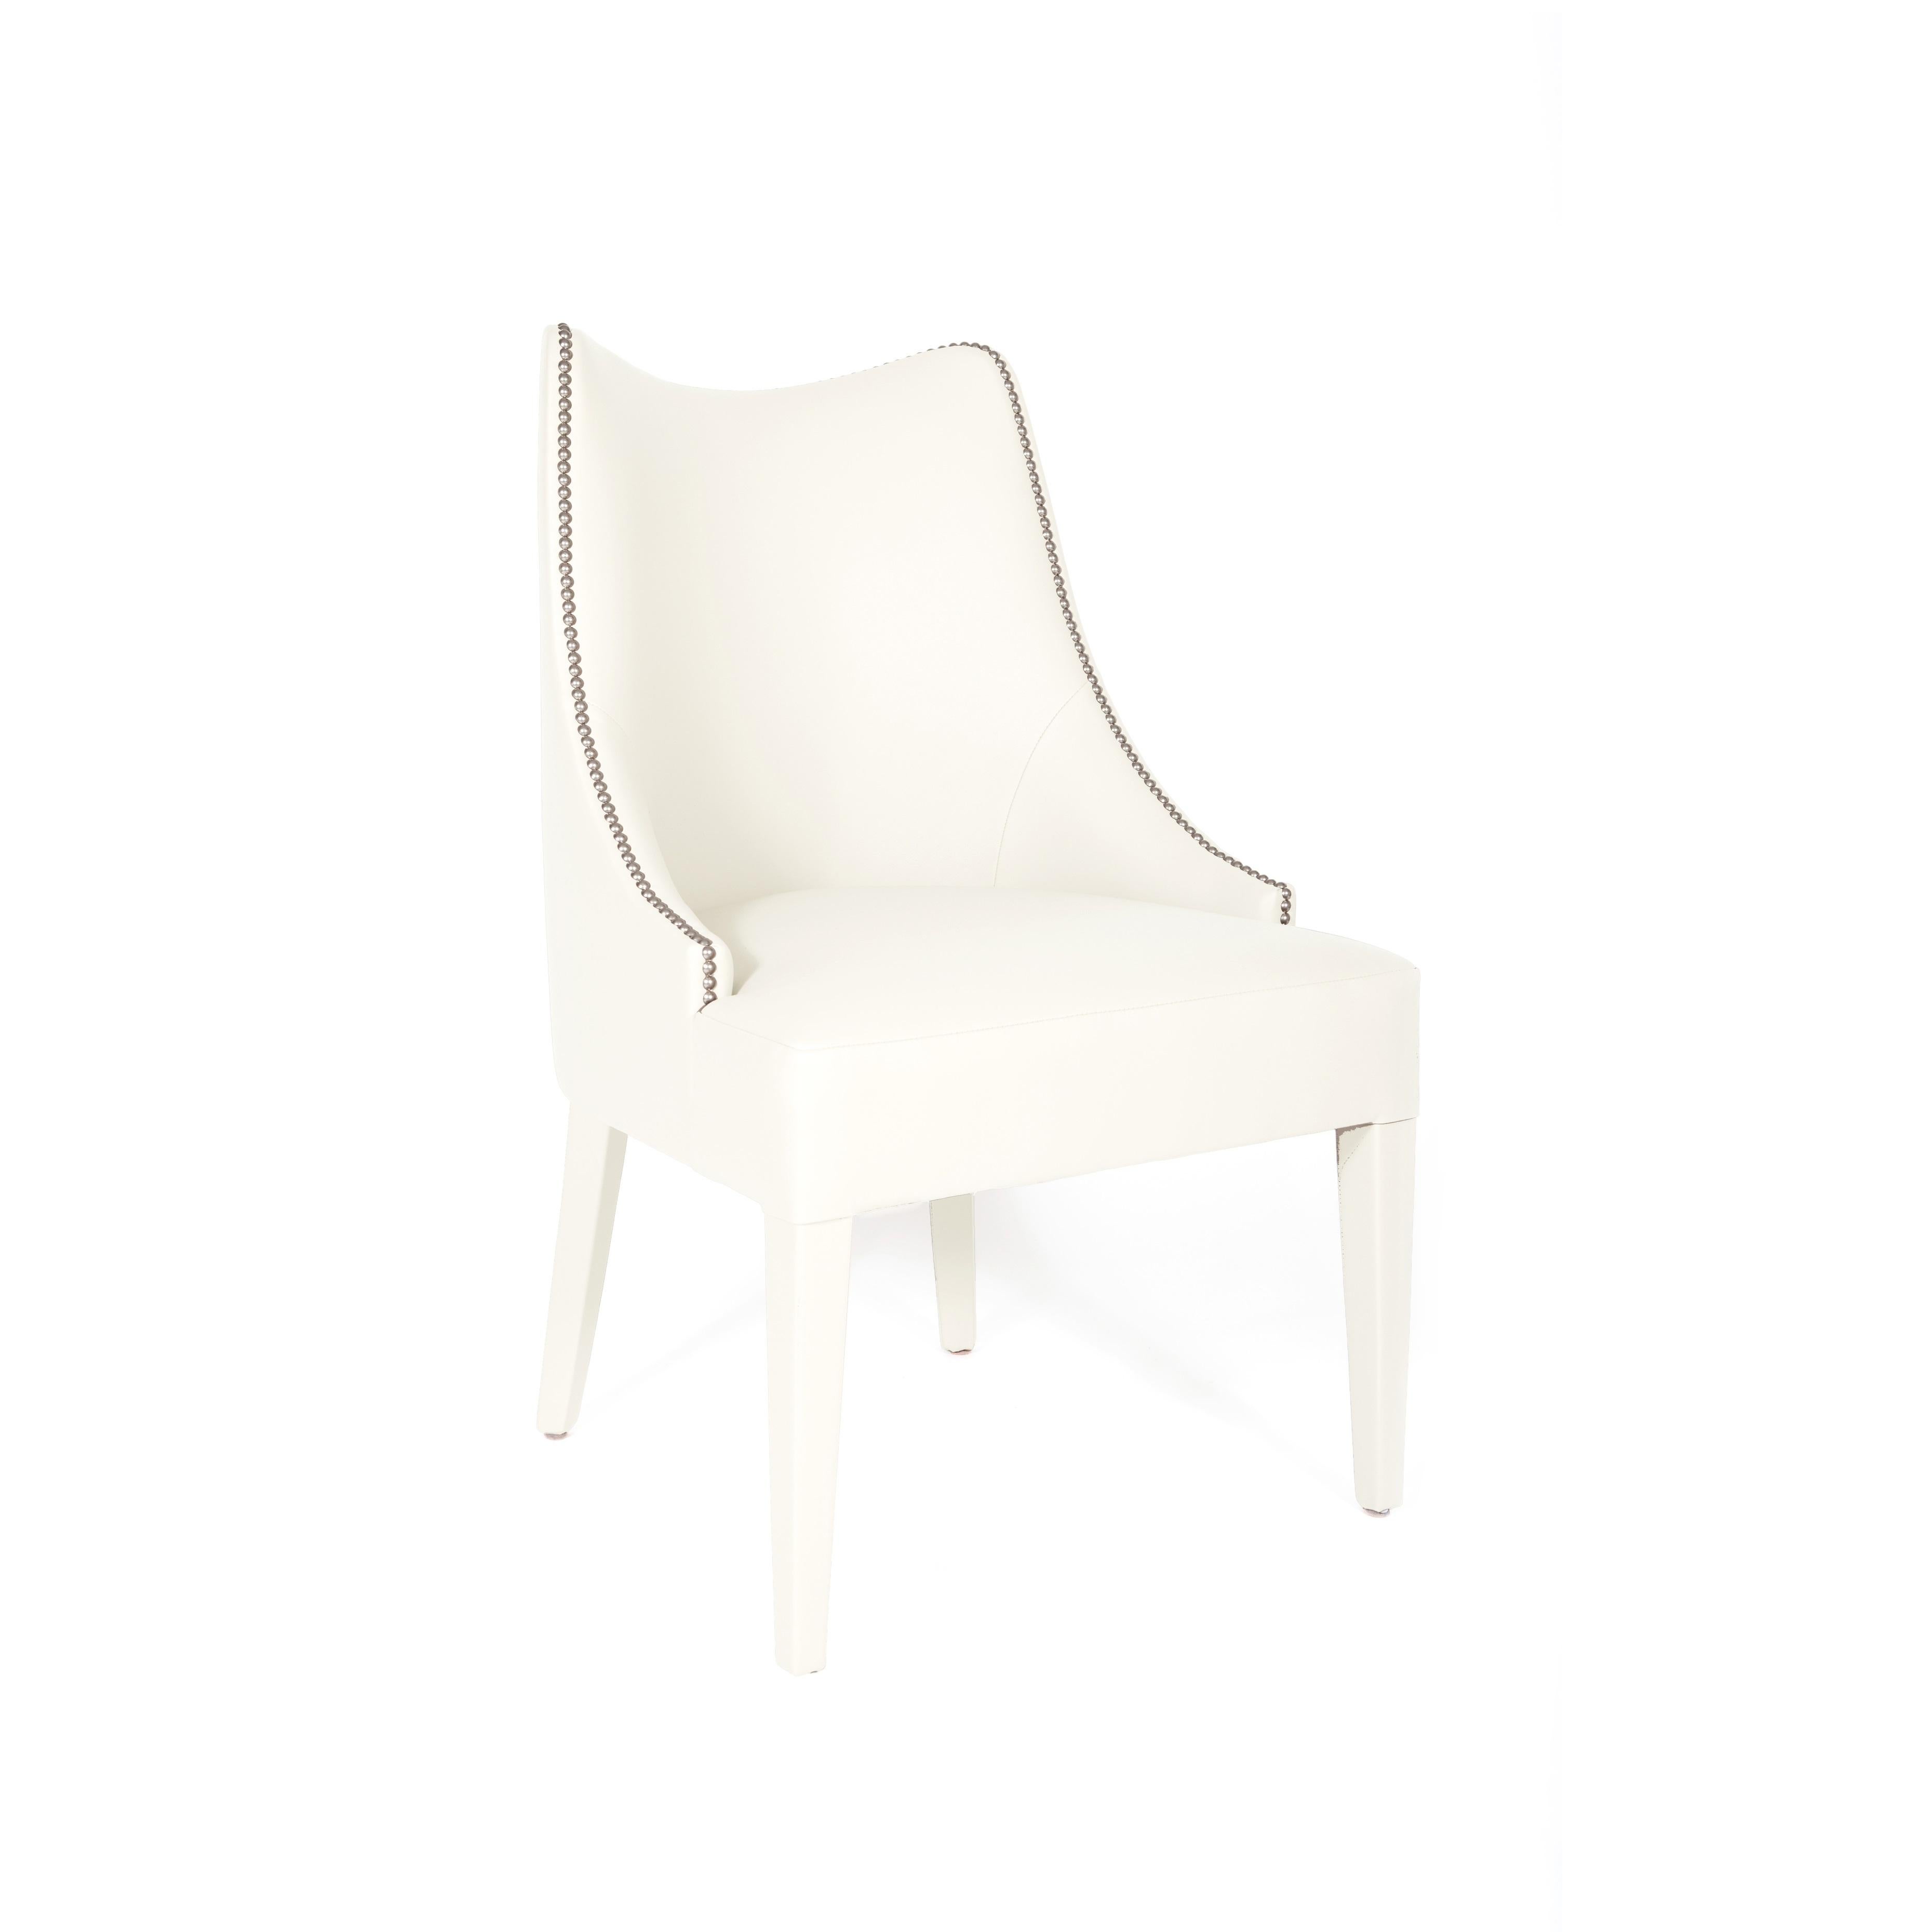 Portuguese Modern Classic Dining Chairs with Nail Trim Detailing By Munna Design For Sale